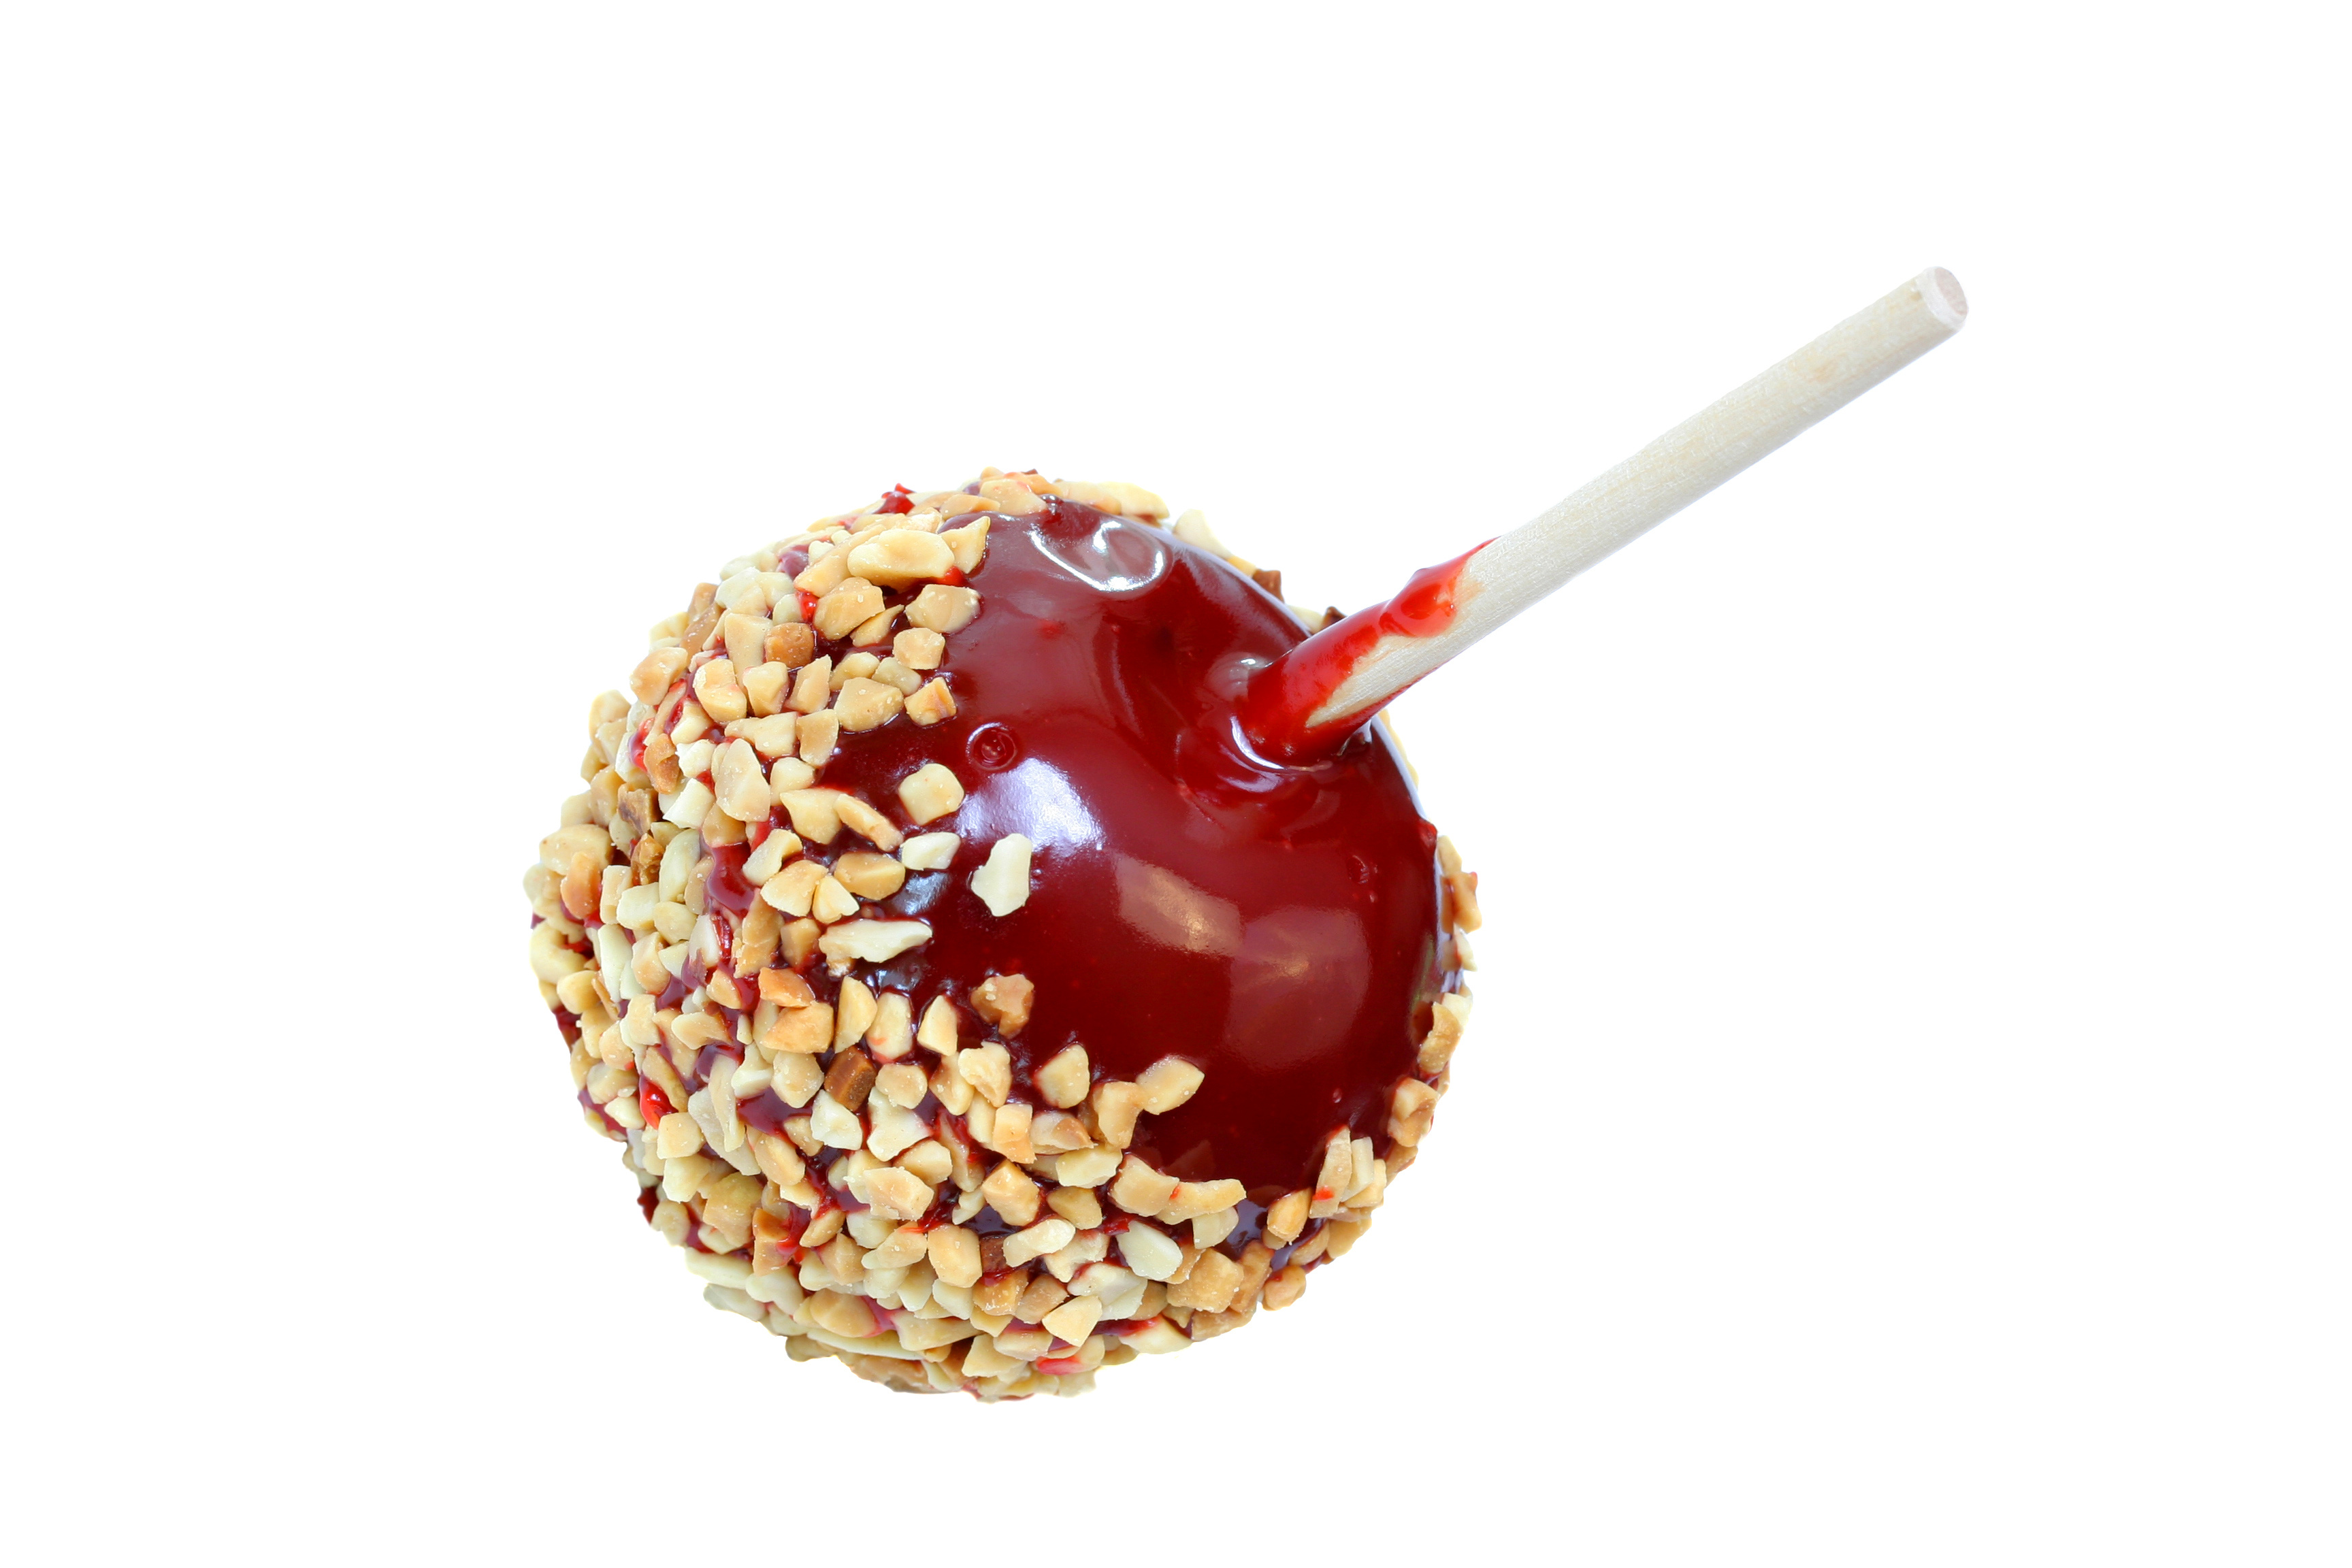 Paper Pointed Candy Apple Stick 5 1/2 x 15/64 - 500/Pack